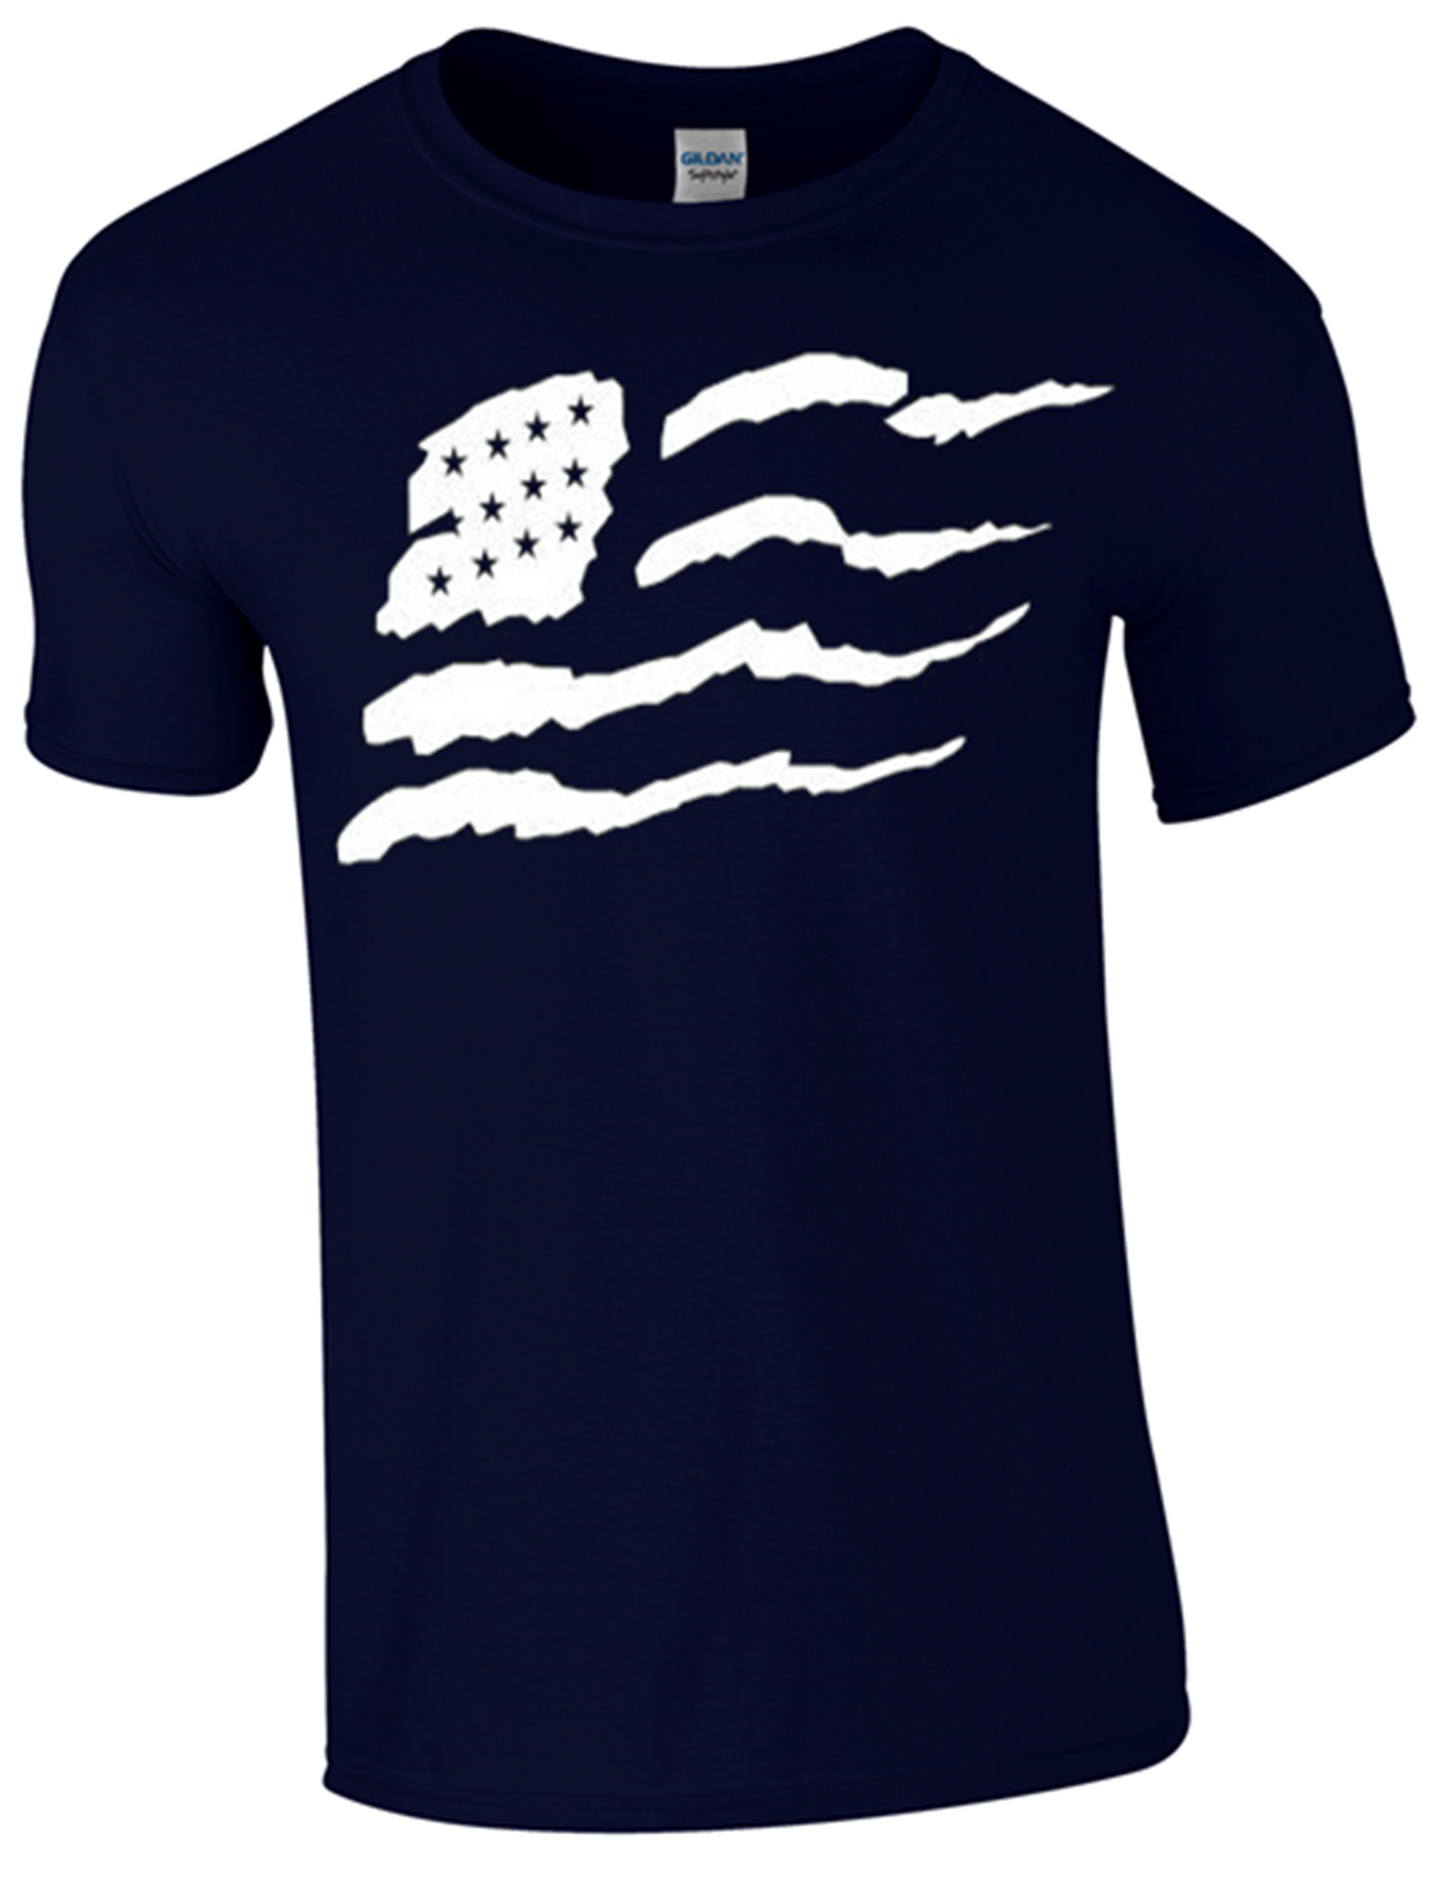 Stars & Stripes T-Shirt Printed DTG (Direct to Garment) for a Permanent Finish. - Army 1157 kit S / Navy Blue Army 1157 Kit Veterans Owned Business